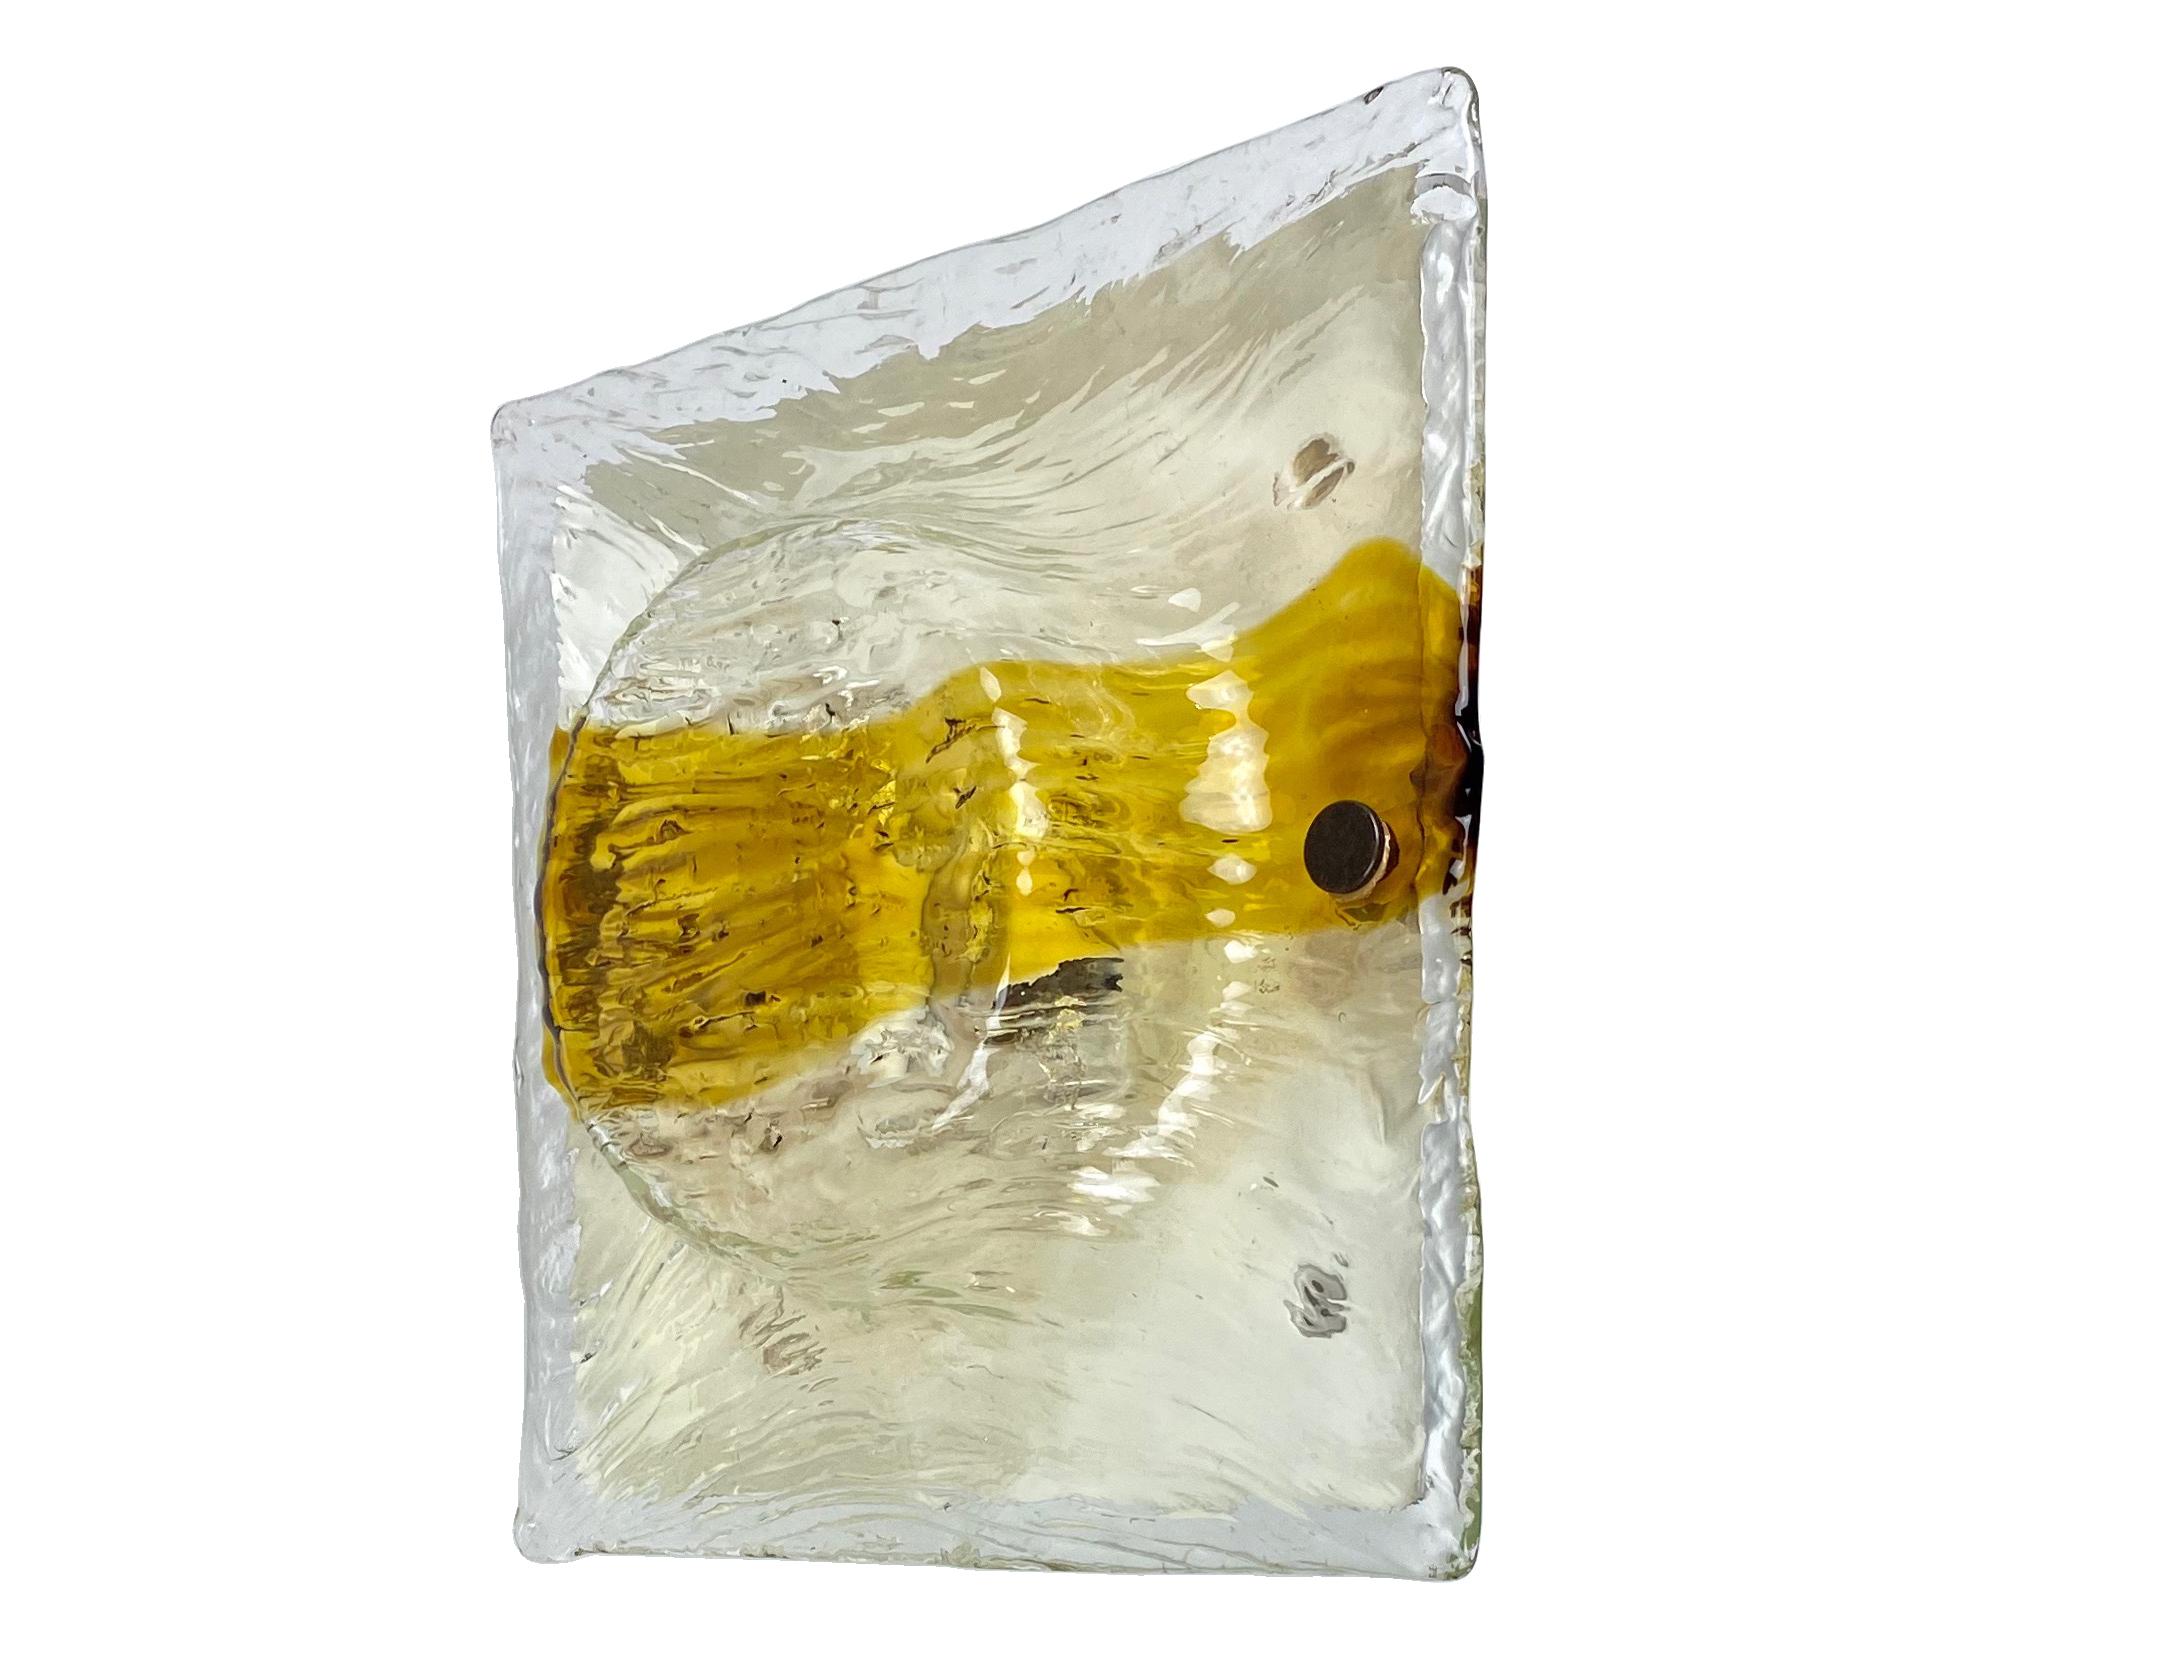 Mid-Century Modern Pair of Murano Glass Wall Lamp Sconces by Toni Zuccheri for Venini, Italy, 1970s